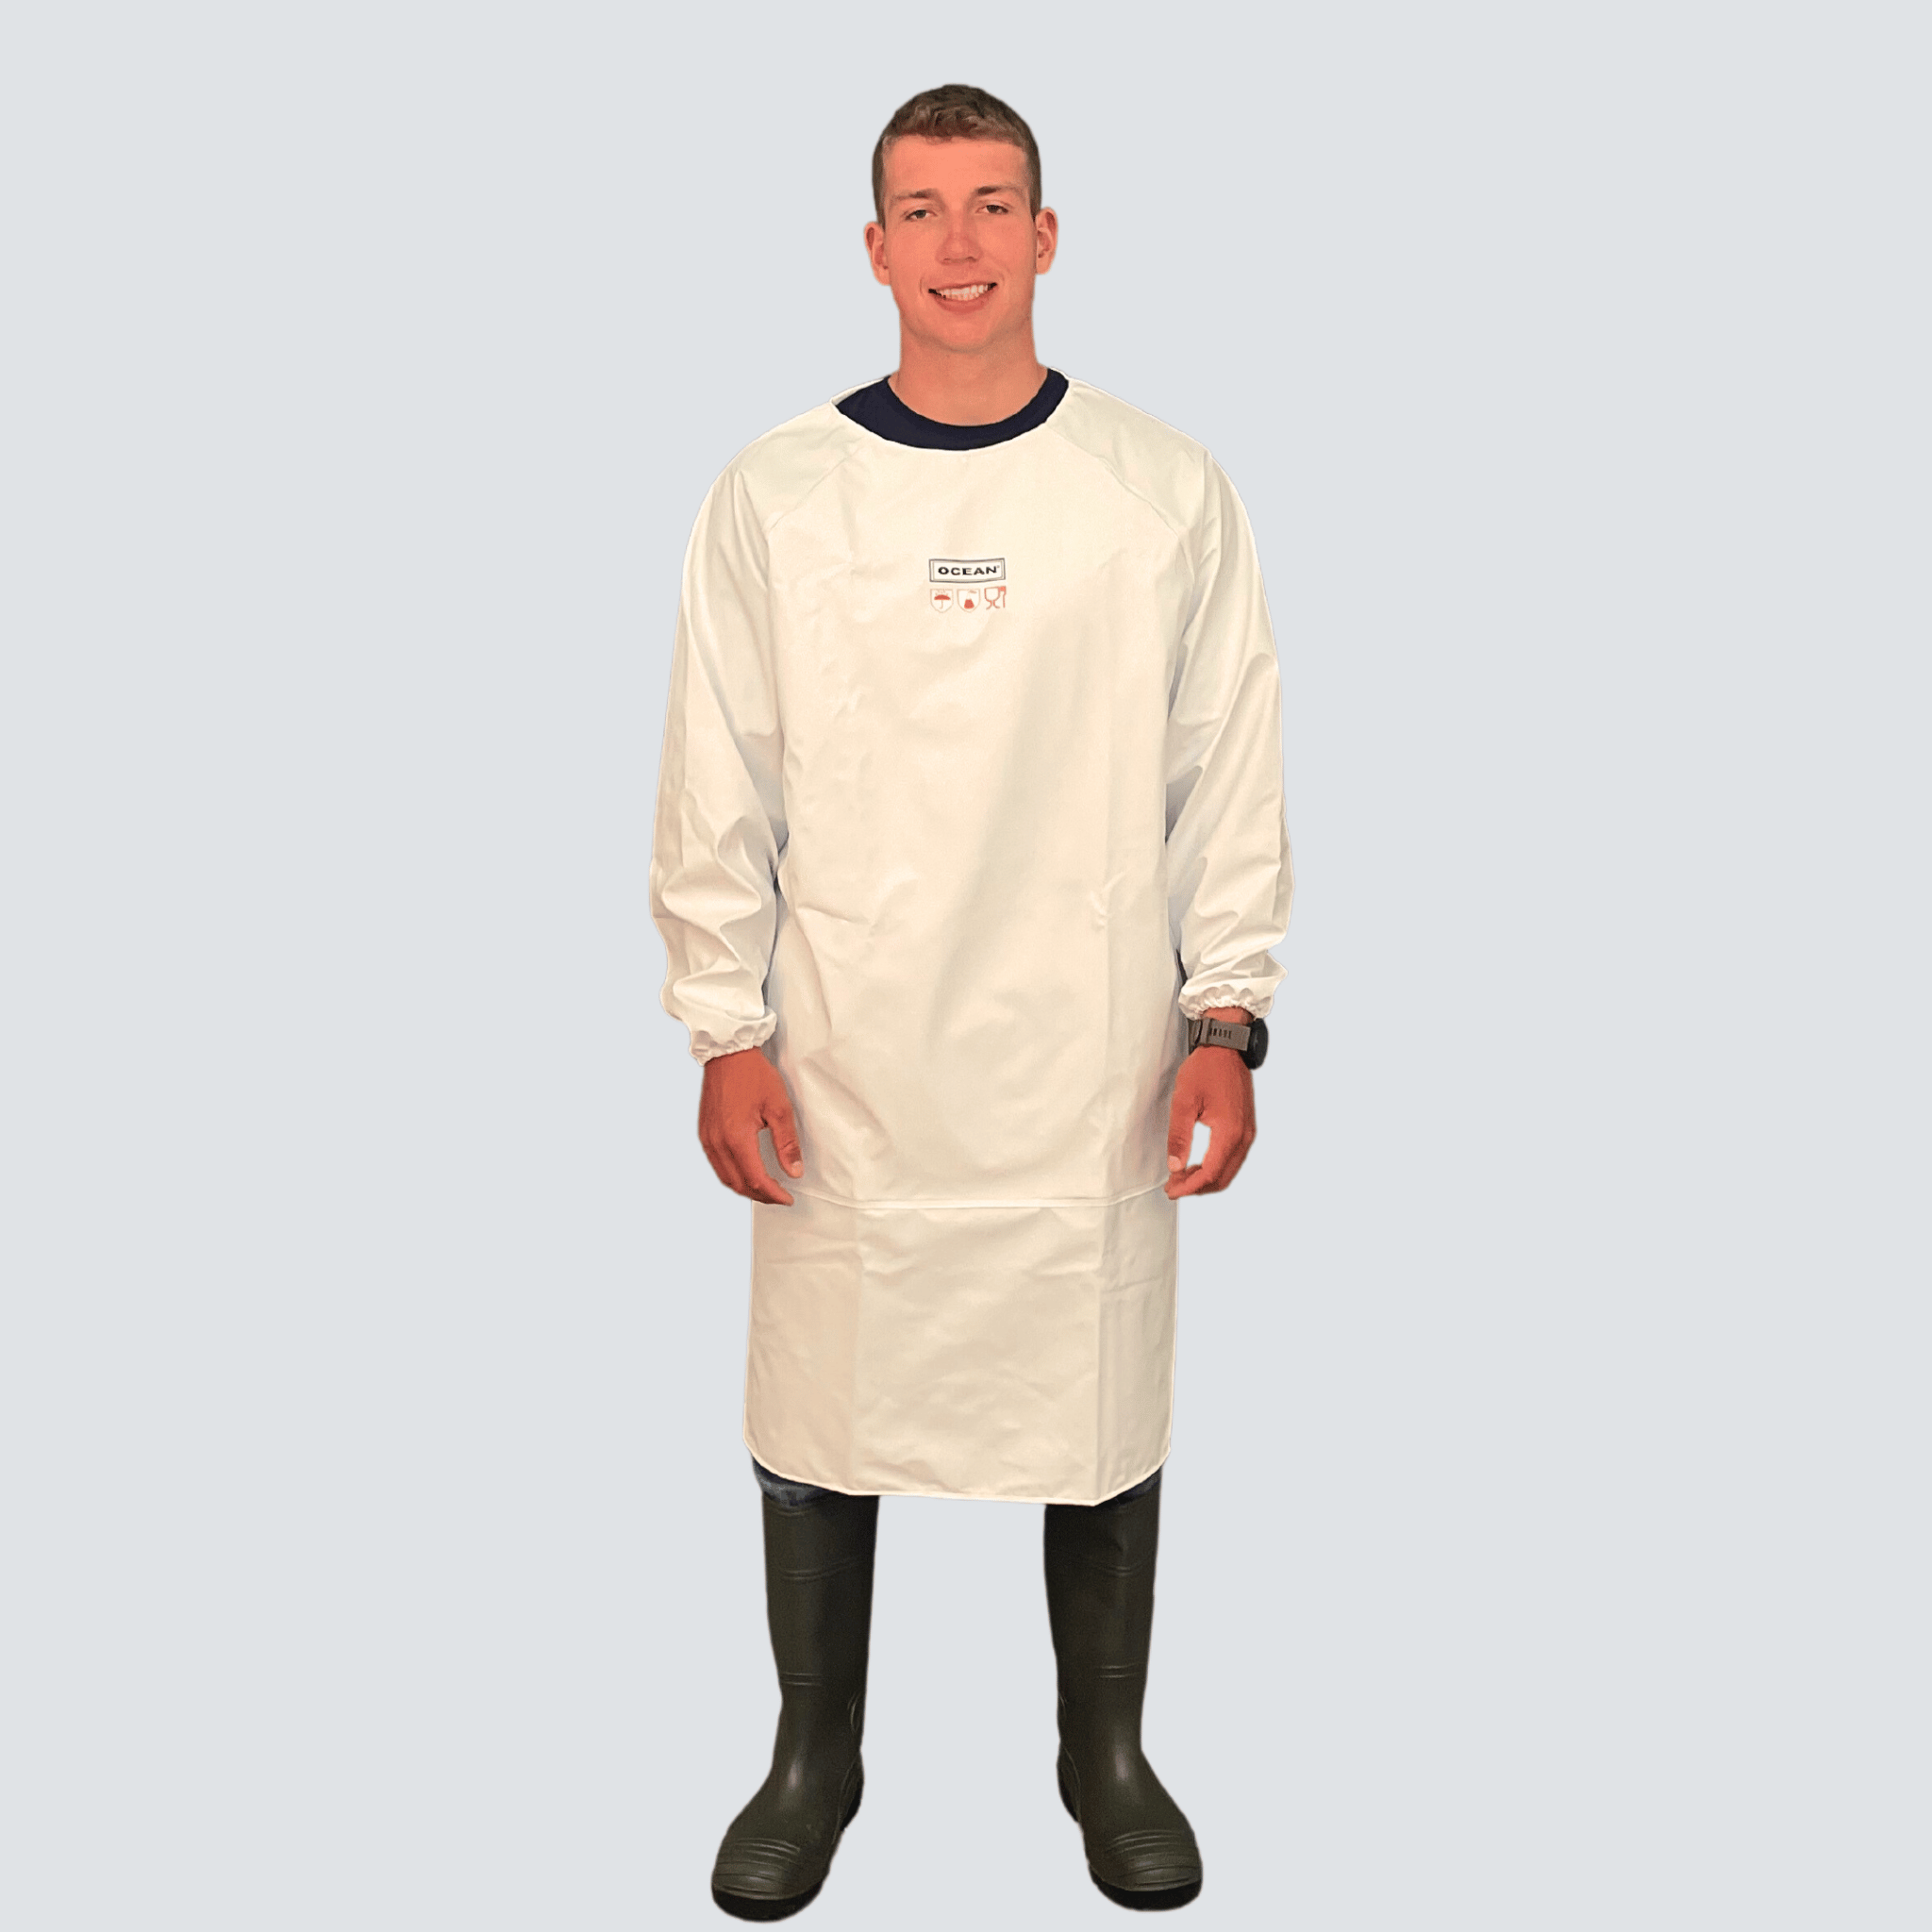 Albertville Comfort apron with sleeves